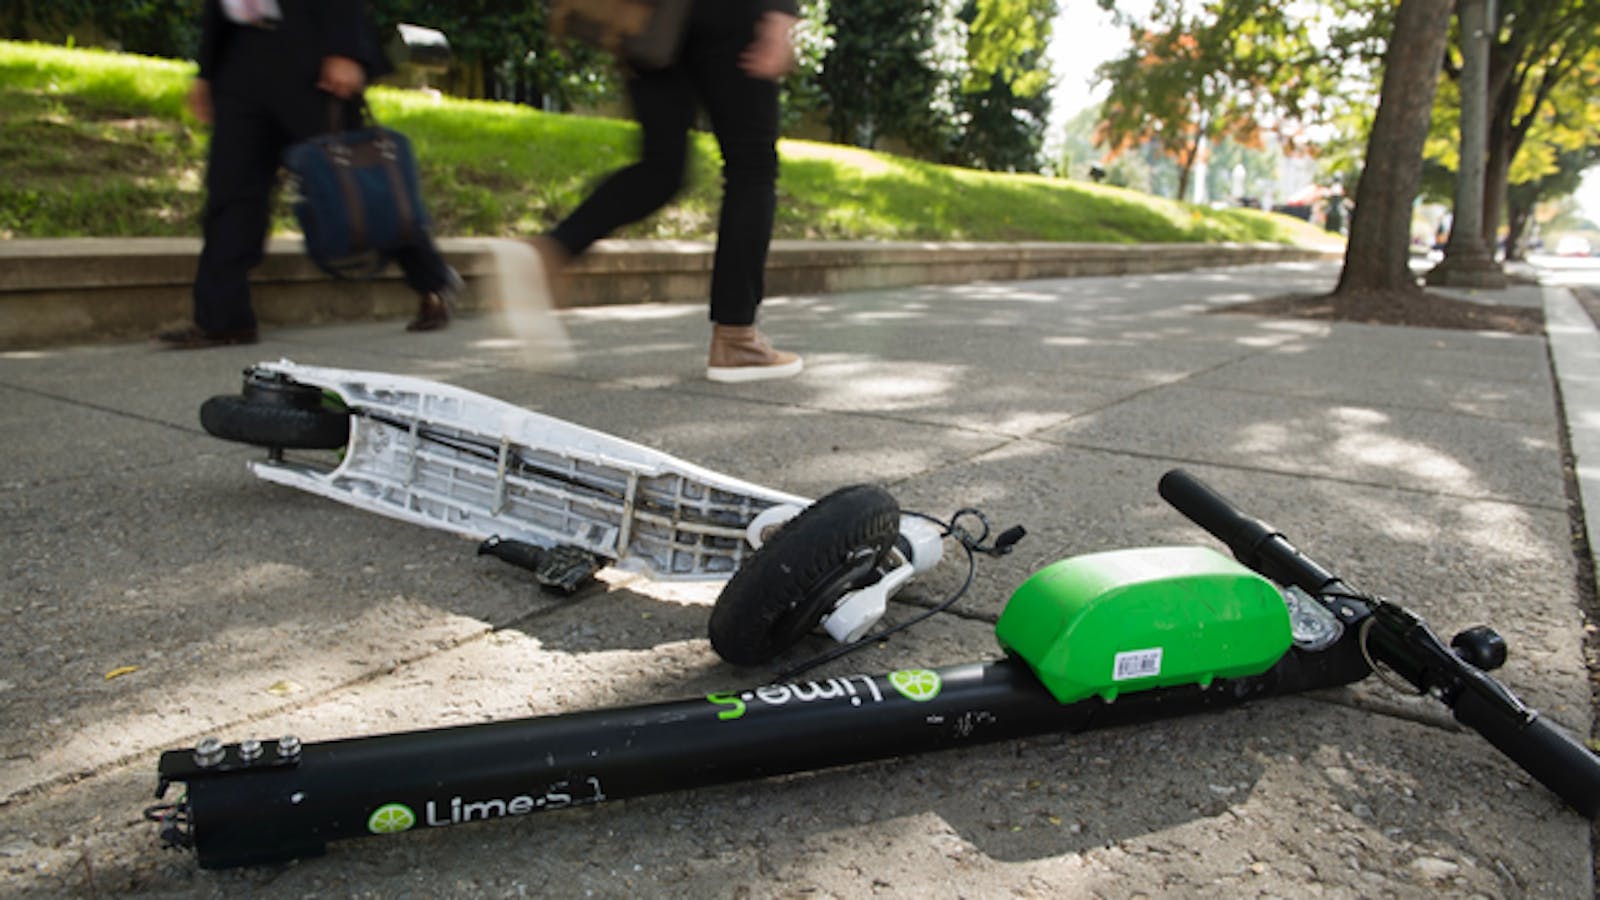 A broken Lime scooter in Washington, D.C., last year. Photo: AP